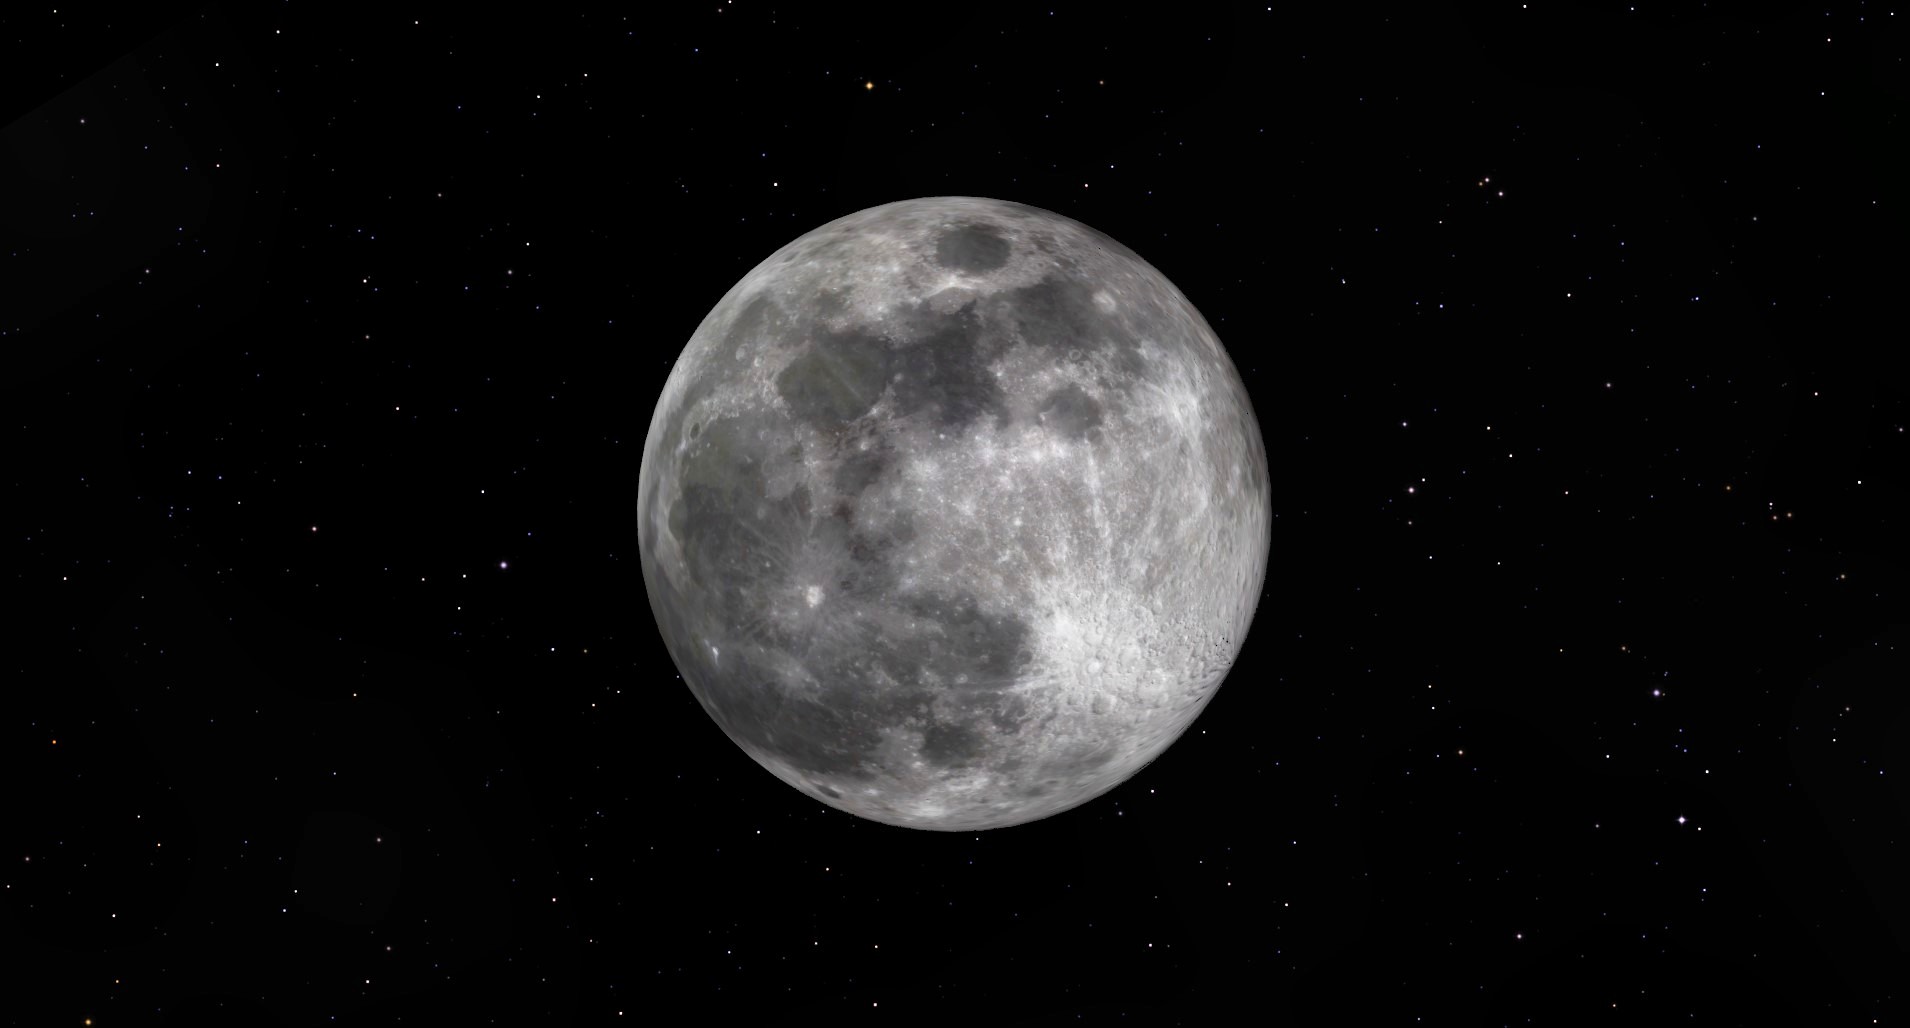 December's full moon: When to see the Christmas moon - Good Morning America